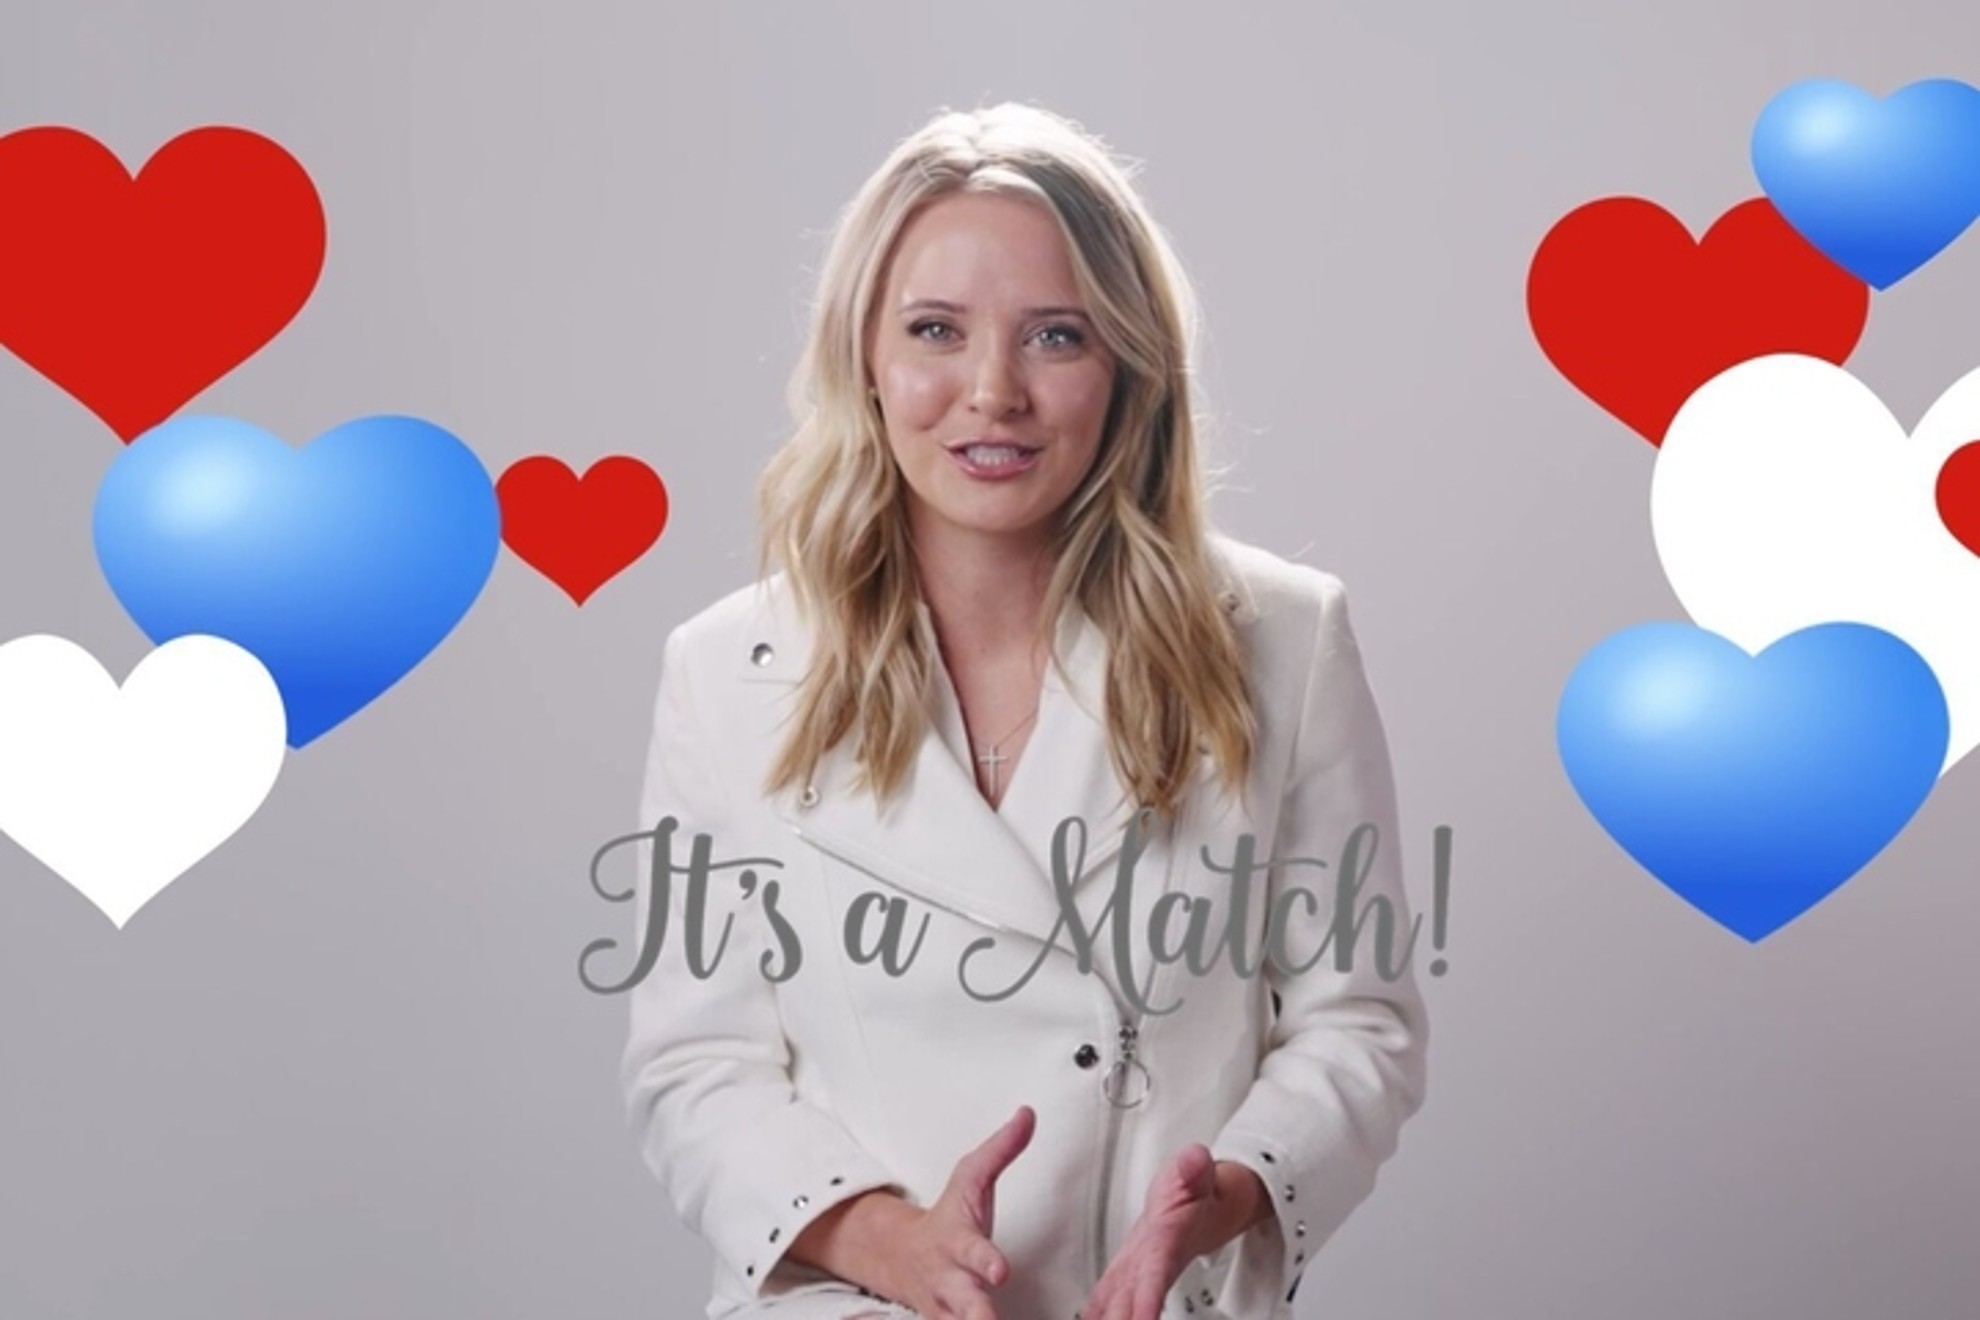 This is 'The Right Stuff', the controversial right-wing Tinder for conservatives